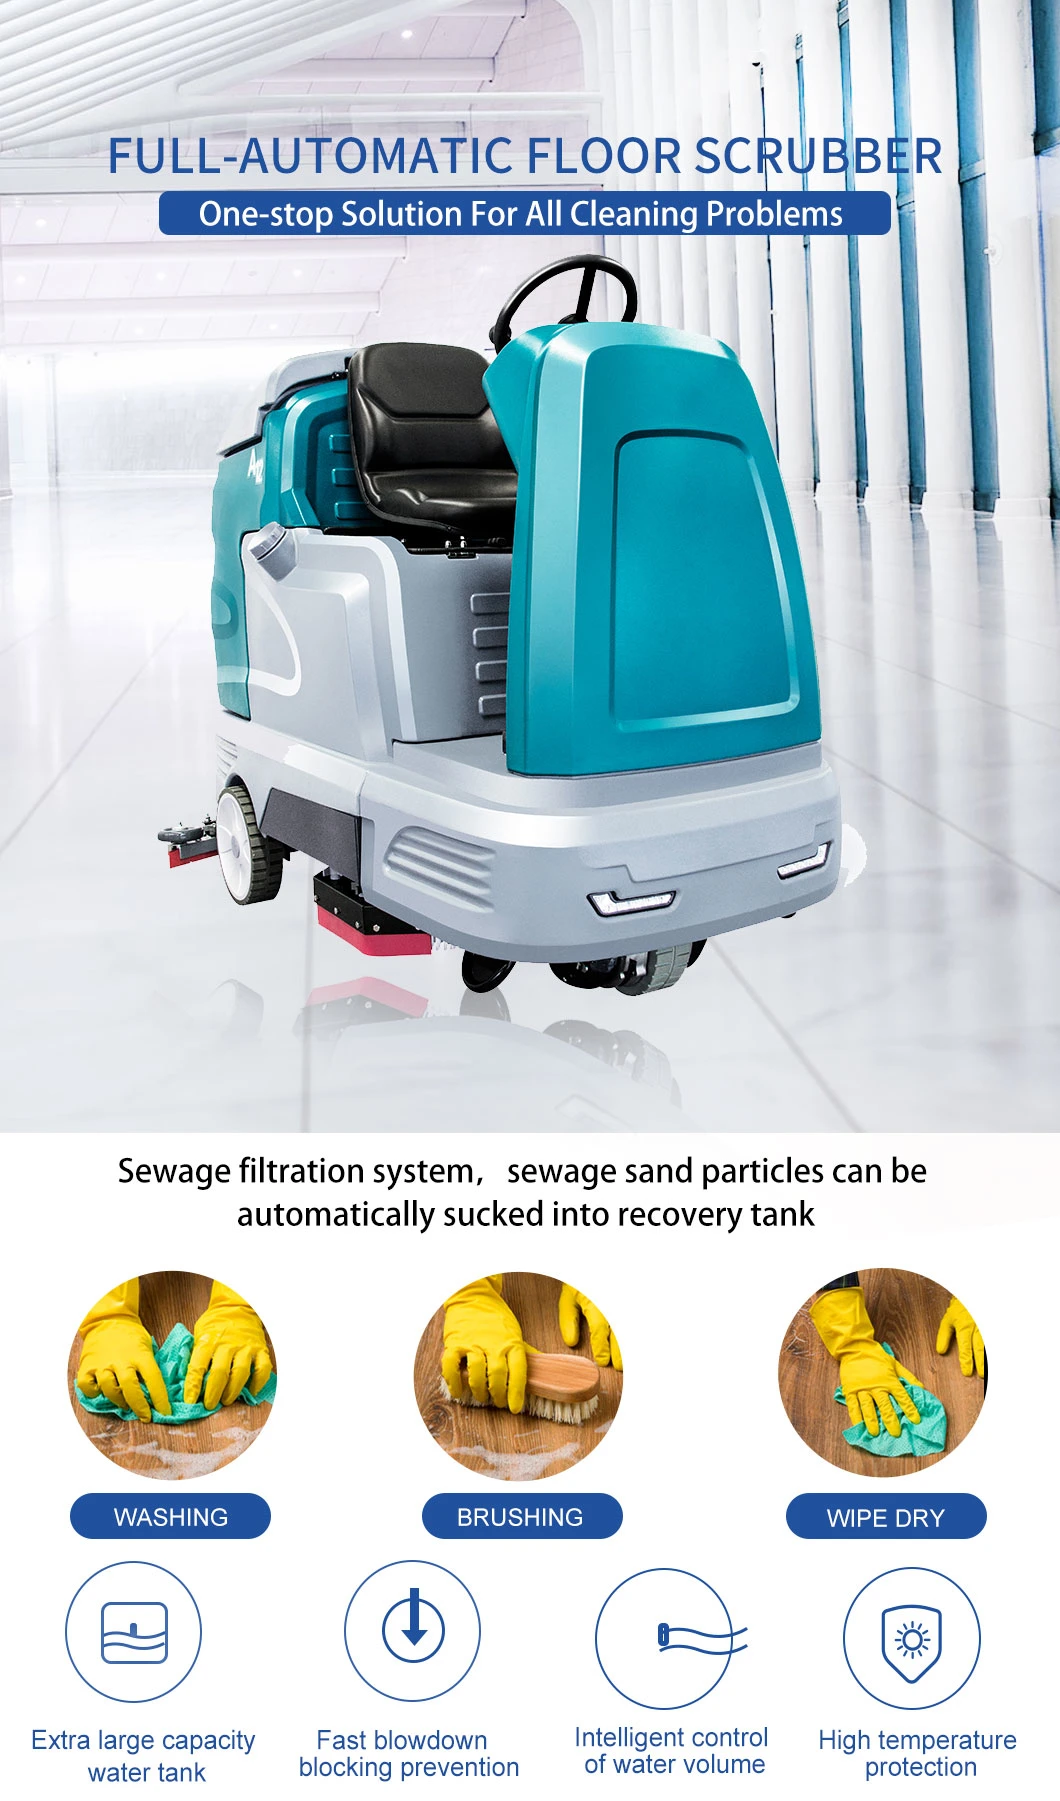 Auto Battery Scrubber Dryer Marble Tile Commercial Industrial Floor Scrubbing Machine